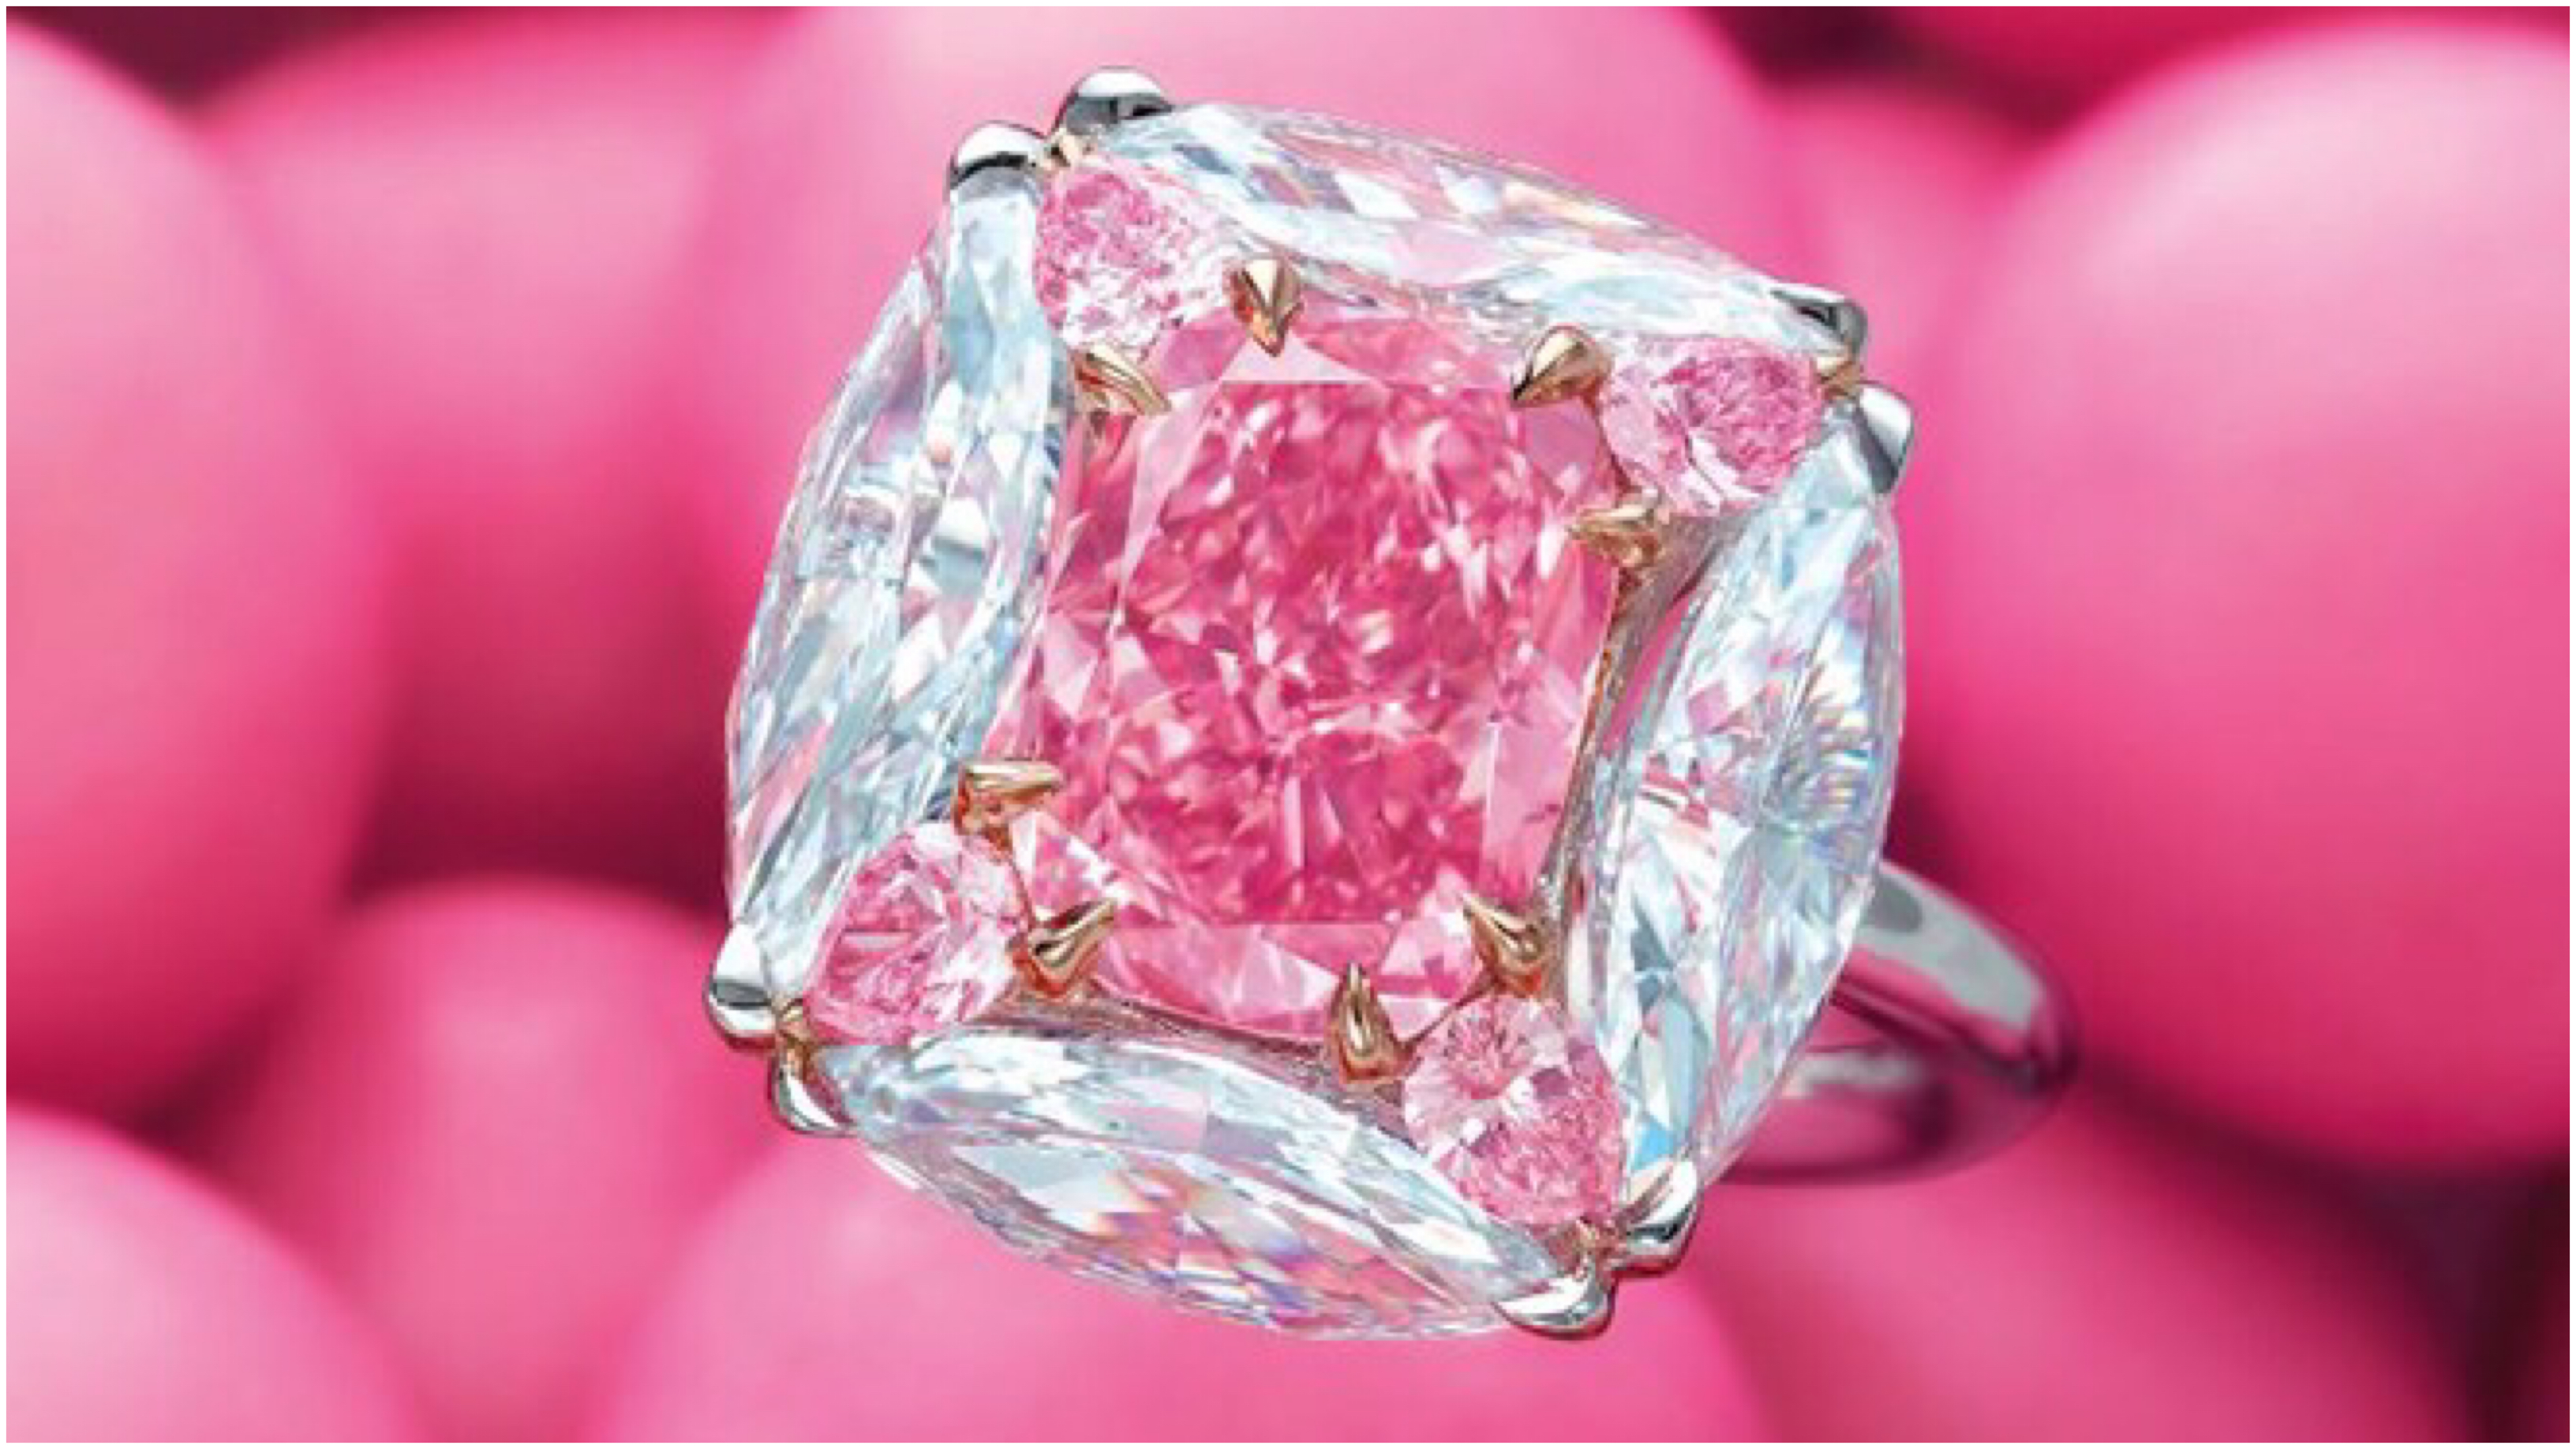 Known for its bubblegum pink appearance, the ‘Strongest Pink’ gem was one of the premier lots sold during the Magnificent Jewels event held regularly by the famed auction house.